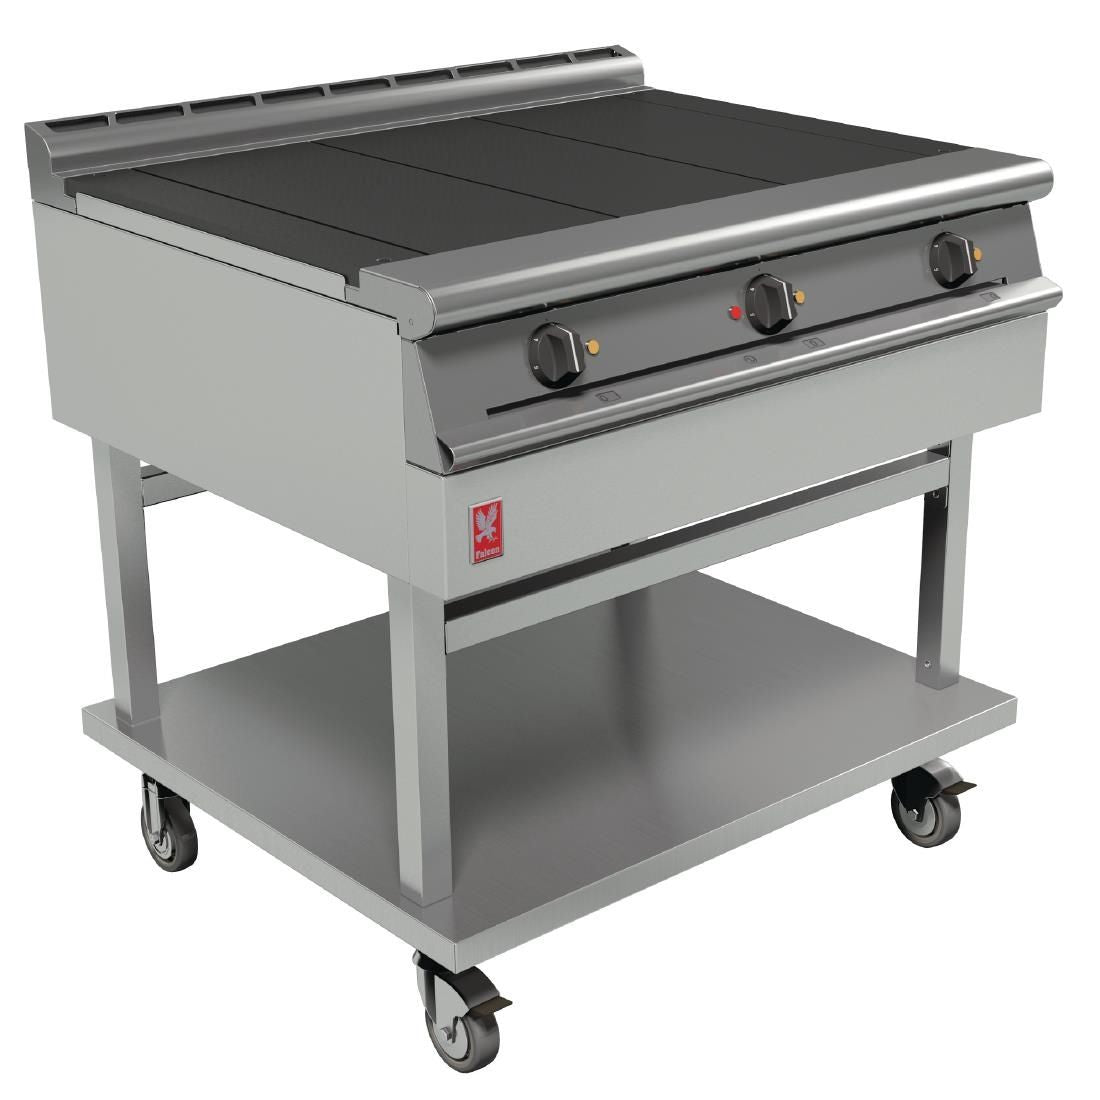 Falcon Dominator Plus 3 Hotplate Boiling Table with Castors E3121 JD Catering Equipment Solutions Ltd